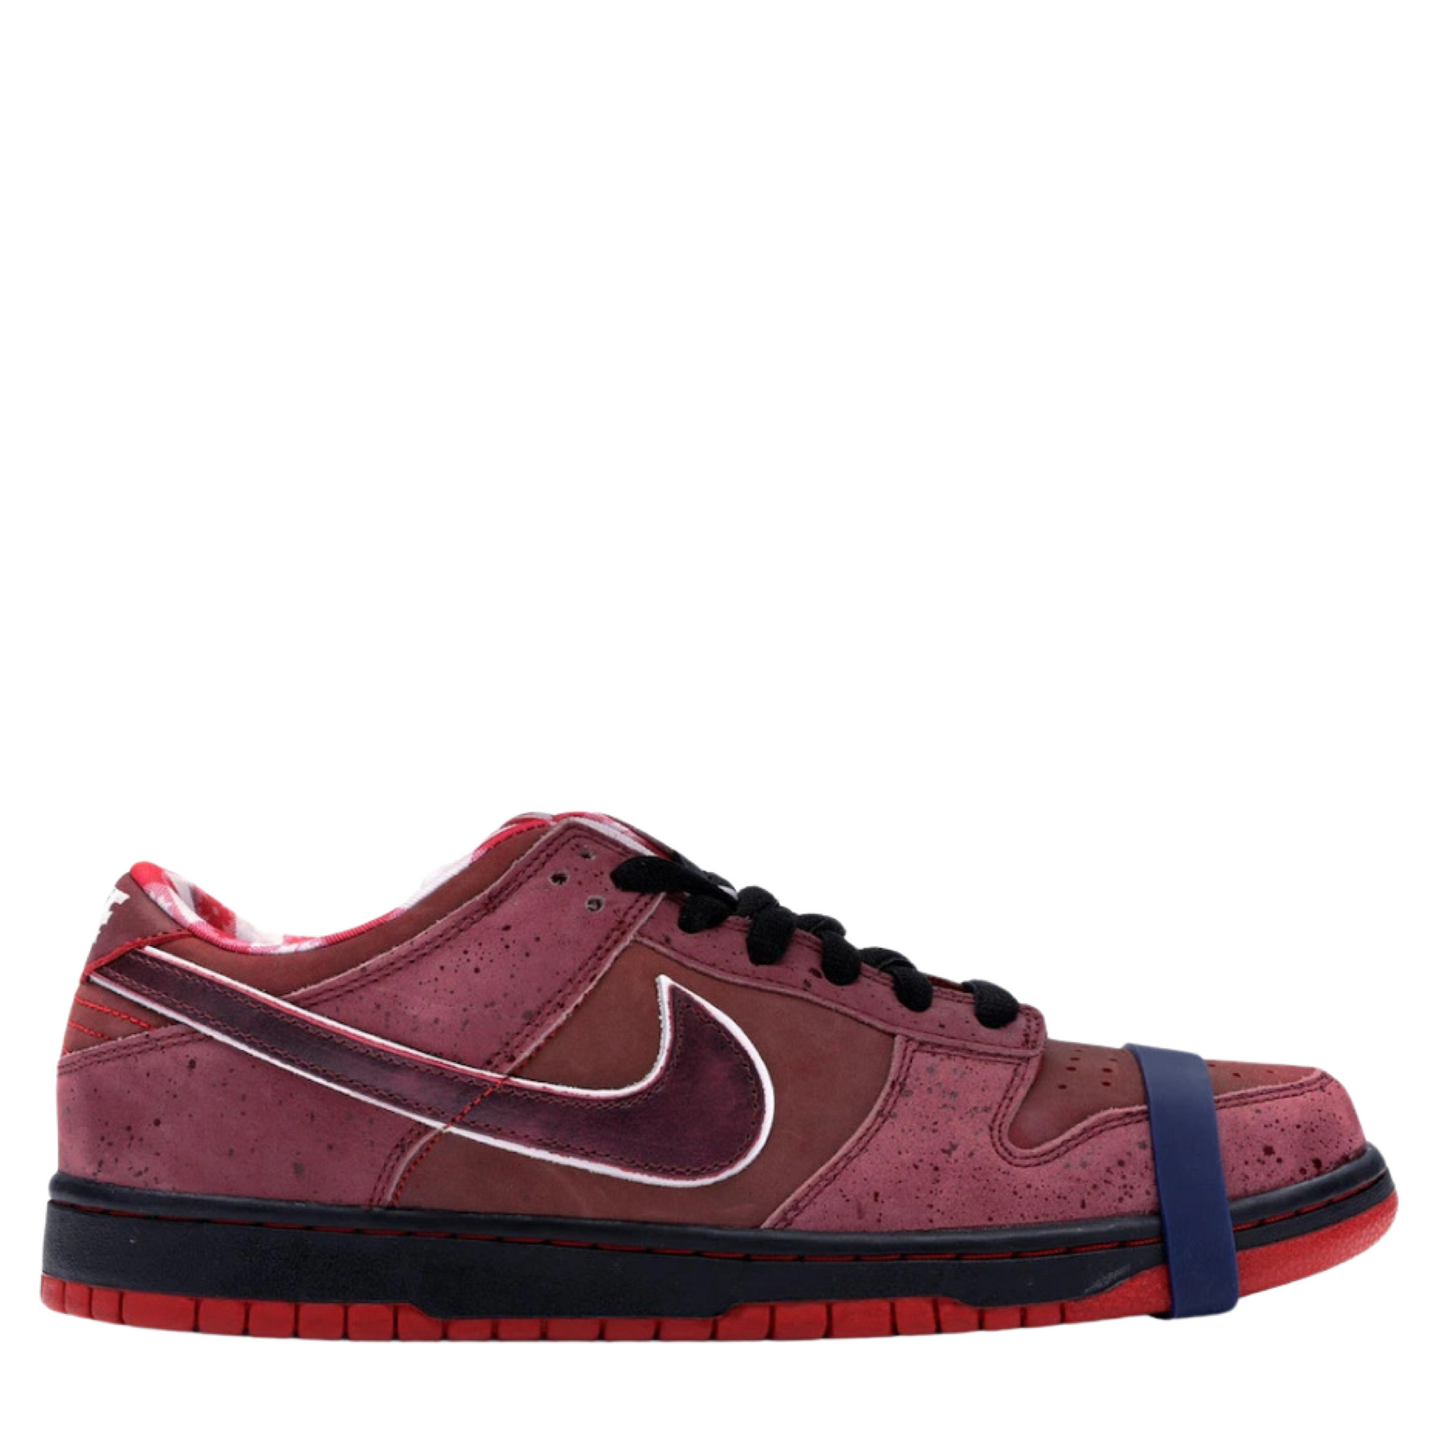 STEAL Dunk Low Red Lobster